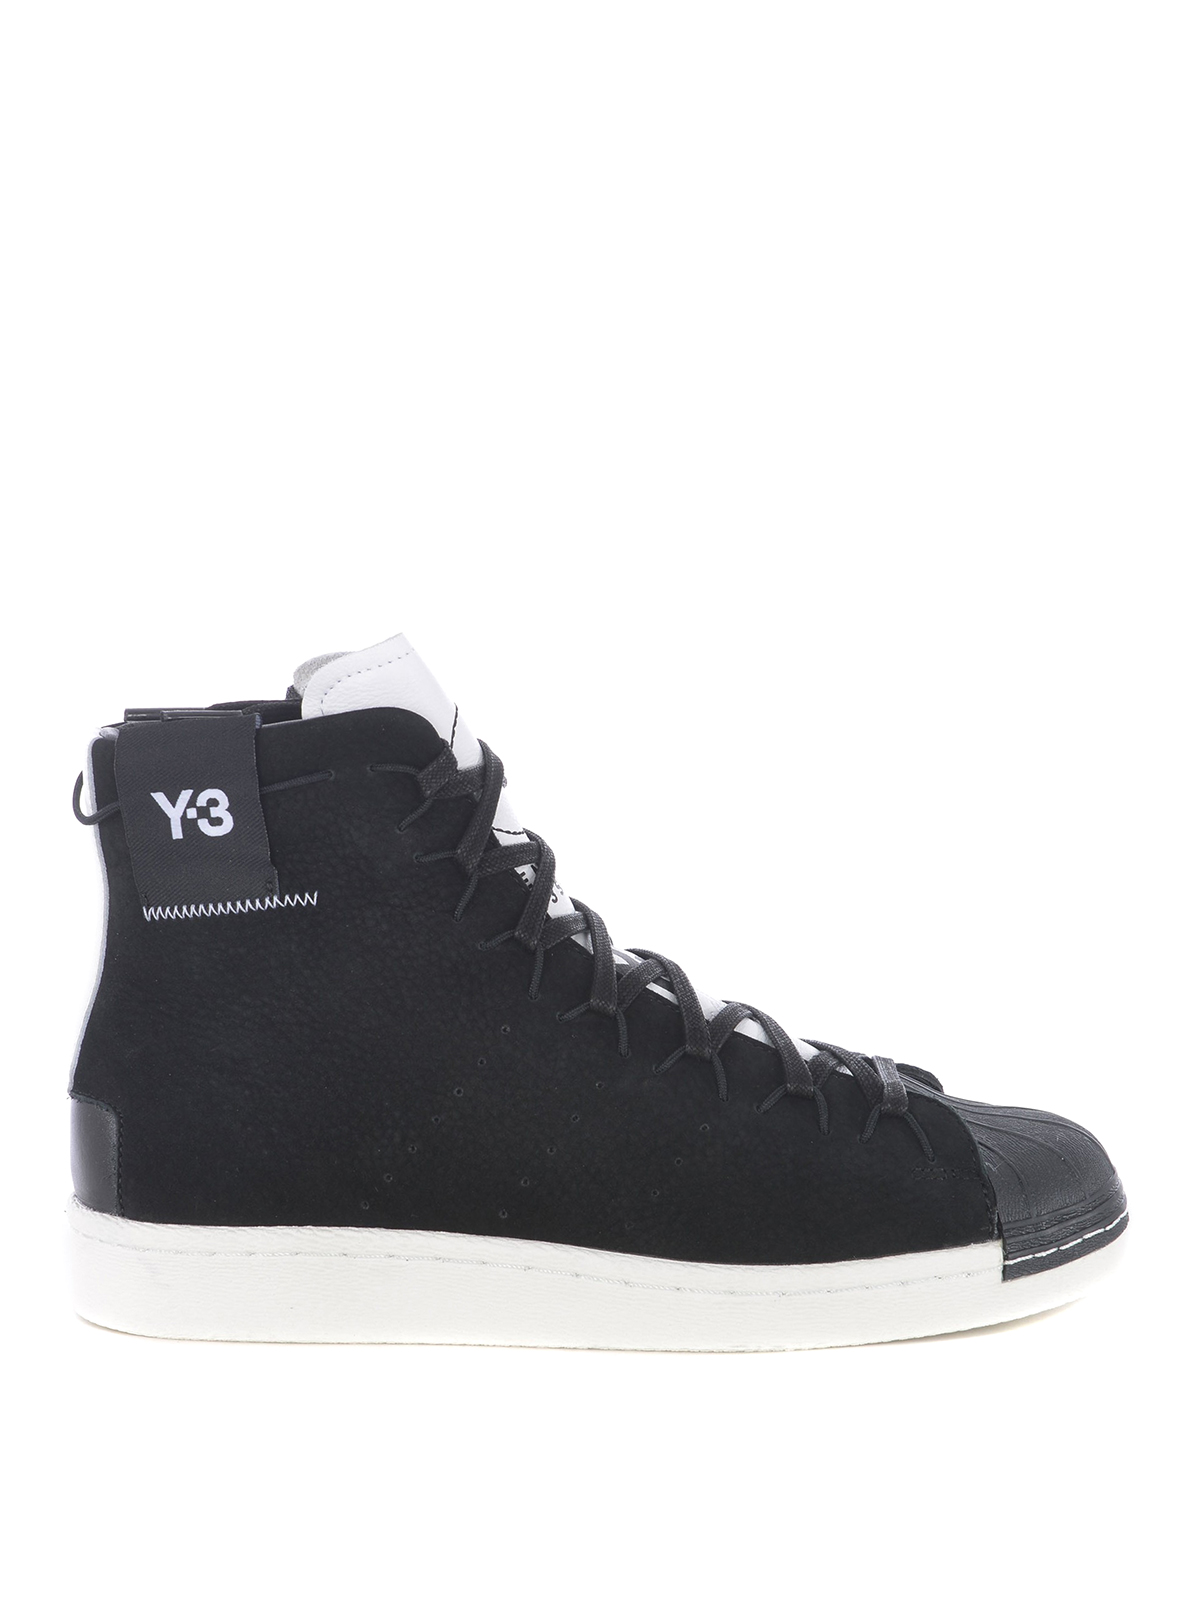 Trainers Y-3 - Super High sneakers - CG6233 | Shop online at THEBS ...